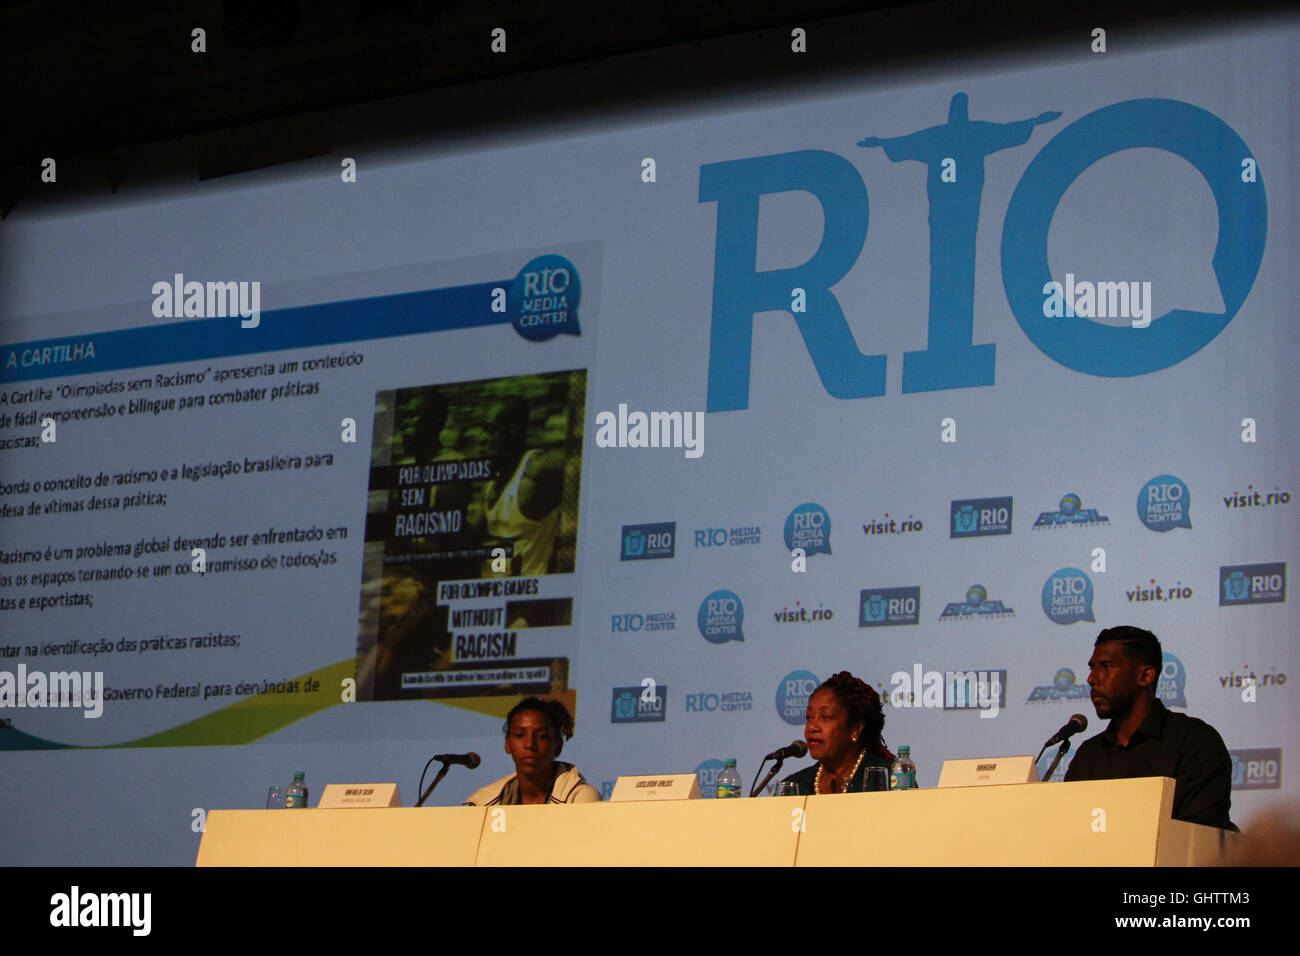 Rio de Janeiro, Brazil August 10, 2016: Rafaela Silva, Brazilian gold medalist athlete of judo, attends a press conference about racial equality in sport to fight against racism. Also participating in the event Luislinda Valois, the Secretariat of Policies to Promote Racial Equality Federal Government, the Aranha goalkeeper, the Ponte Preta football team that has also been a victim of racism in the past. The conference is part of the Olympics Without Racism Program launched by the Secretariat for the Promotion of Racial Equality. Stock Photo